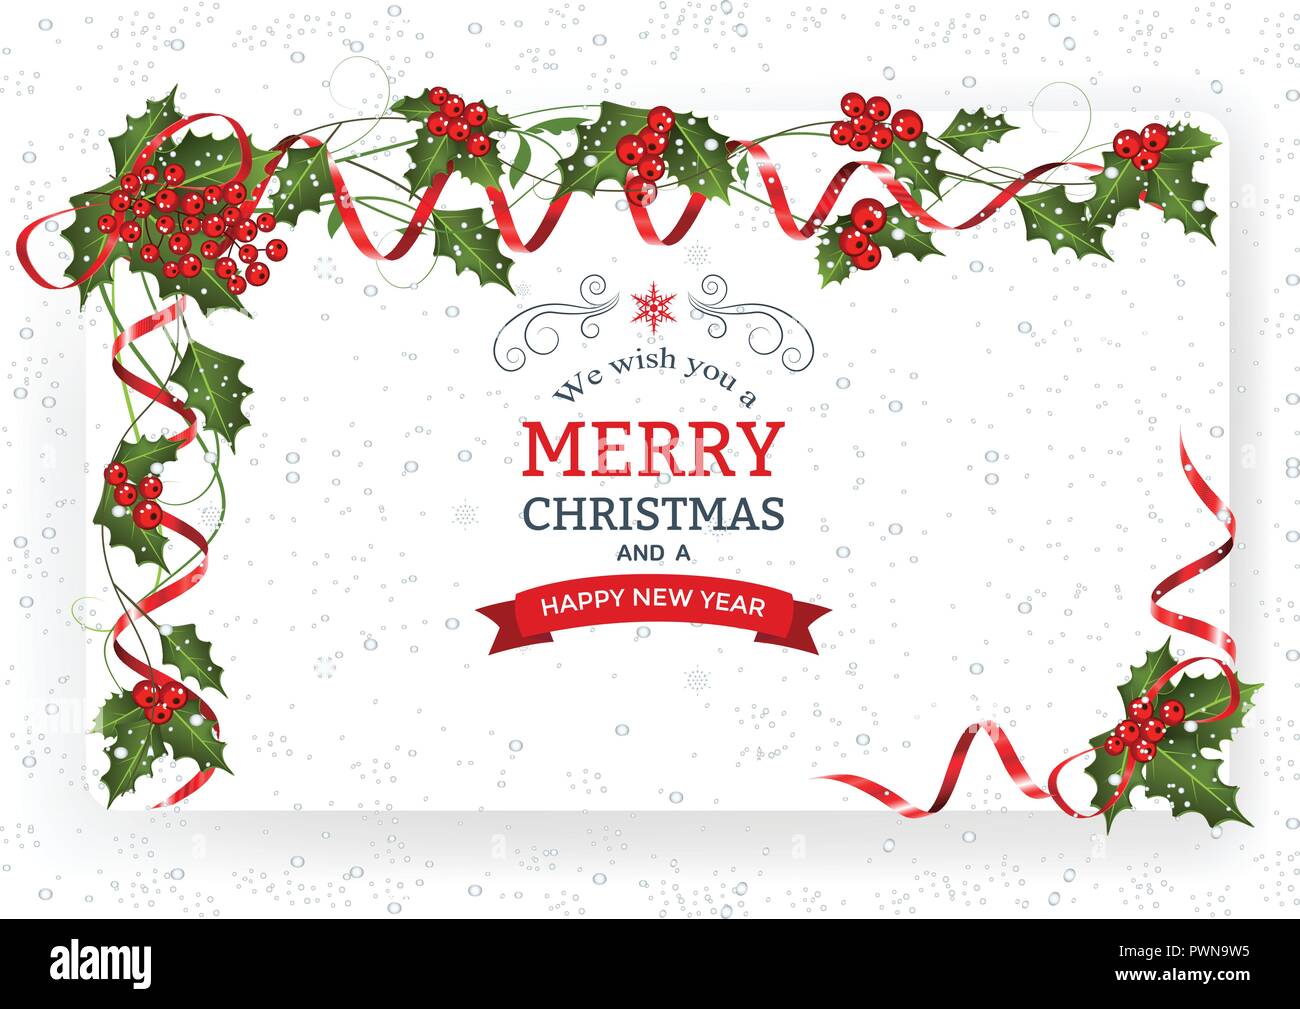 Christmas background with decoration and paper. Decorative Christmas festive background with berry and ribbons. Stock Vector